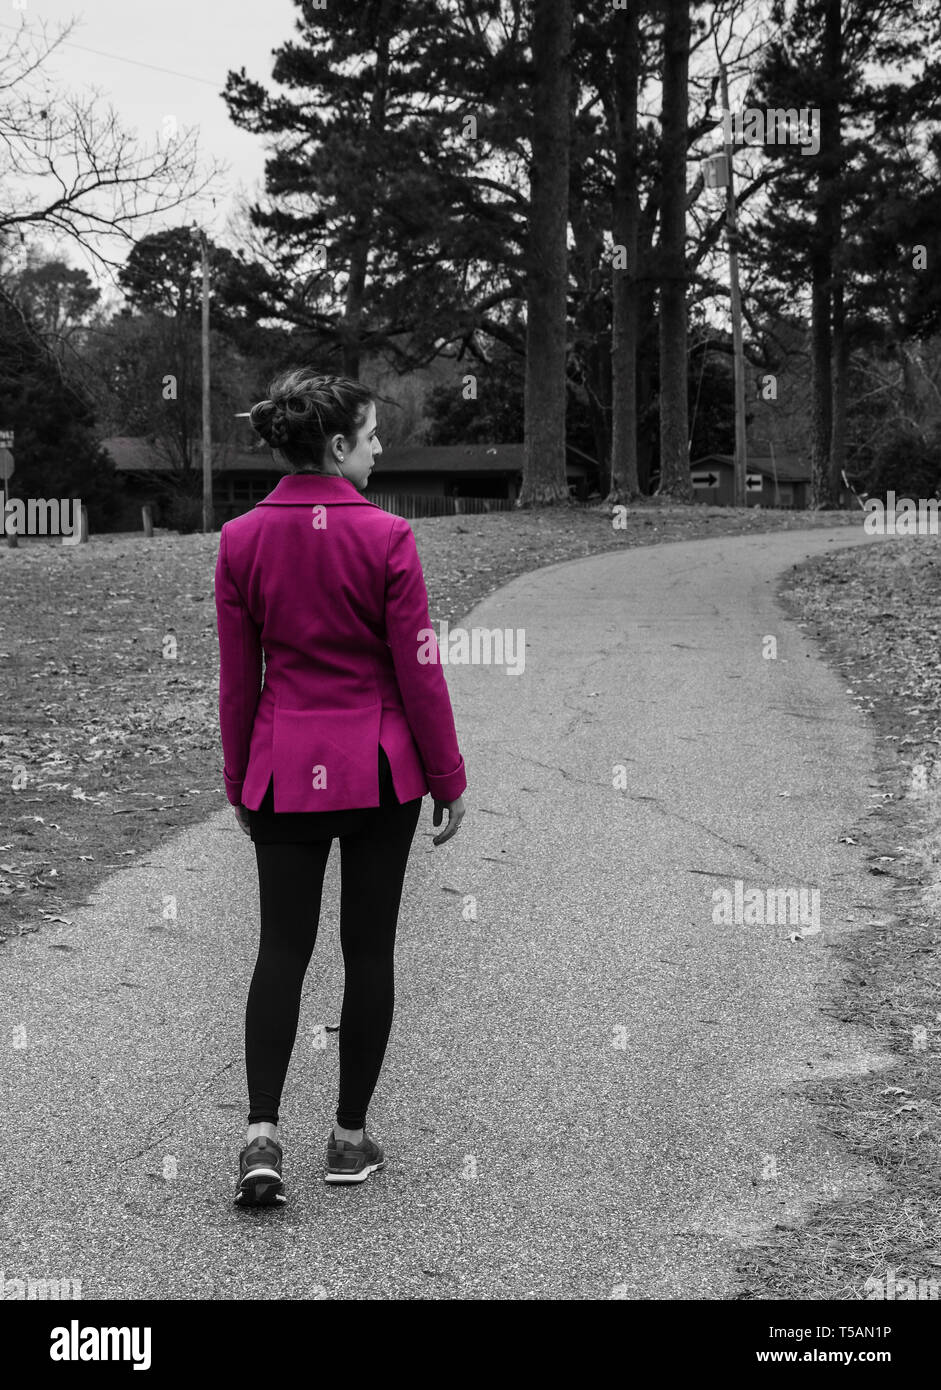 Black white back, profile view of young woman with braided hair walking on curving path, bright pink jacket, coat, color spot,  color Stock Photo